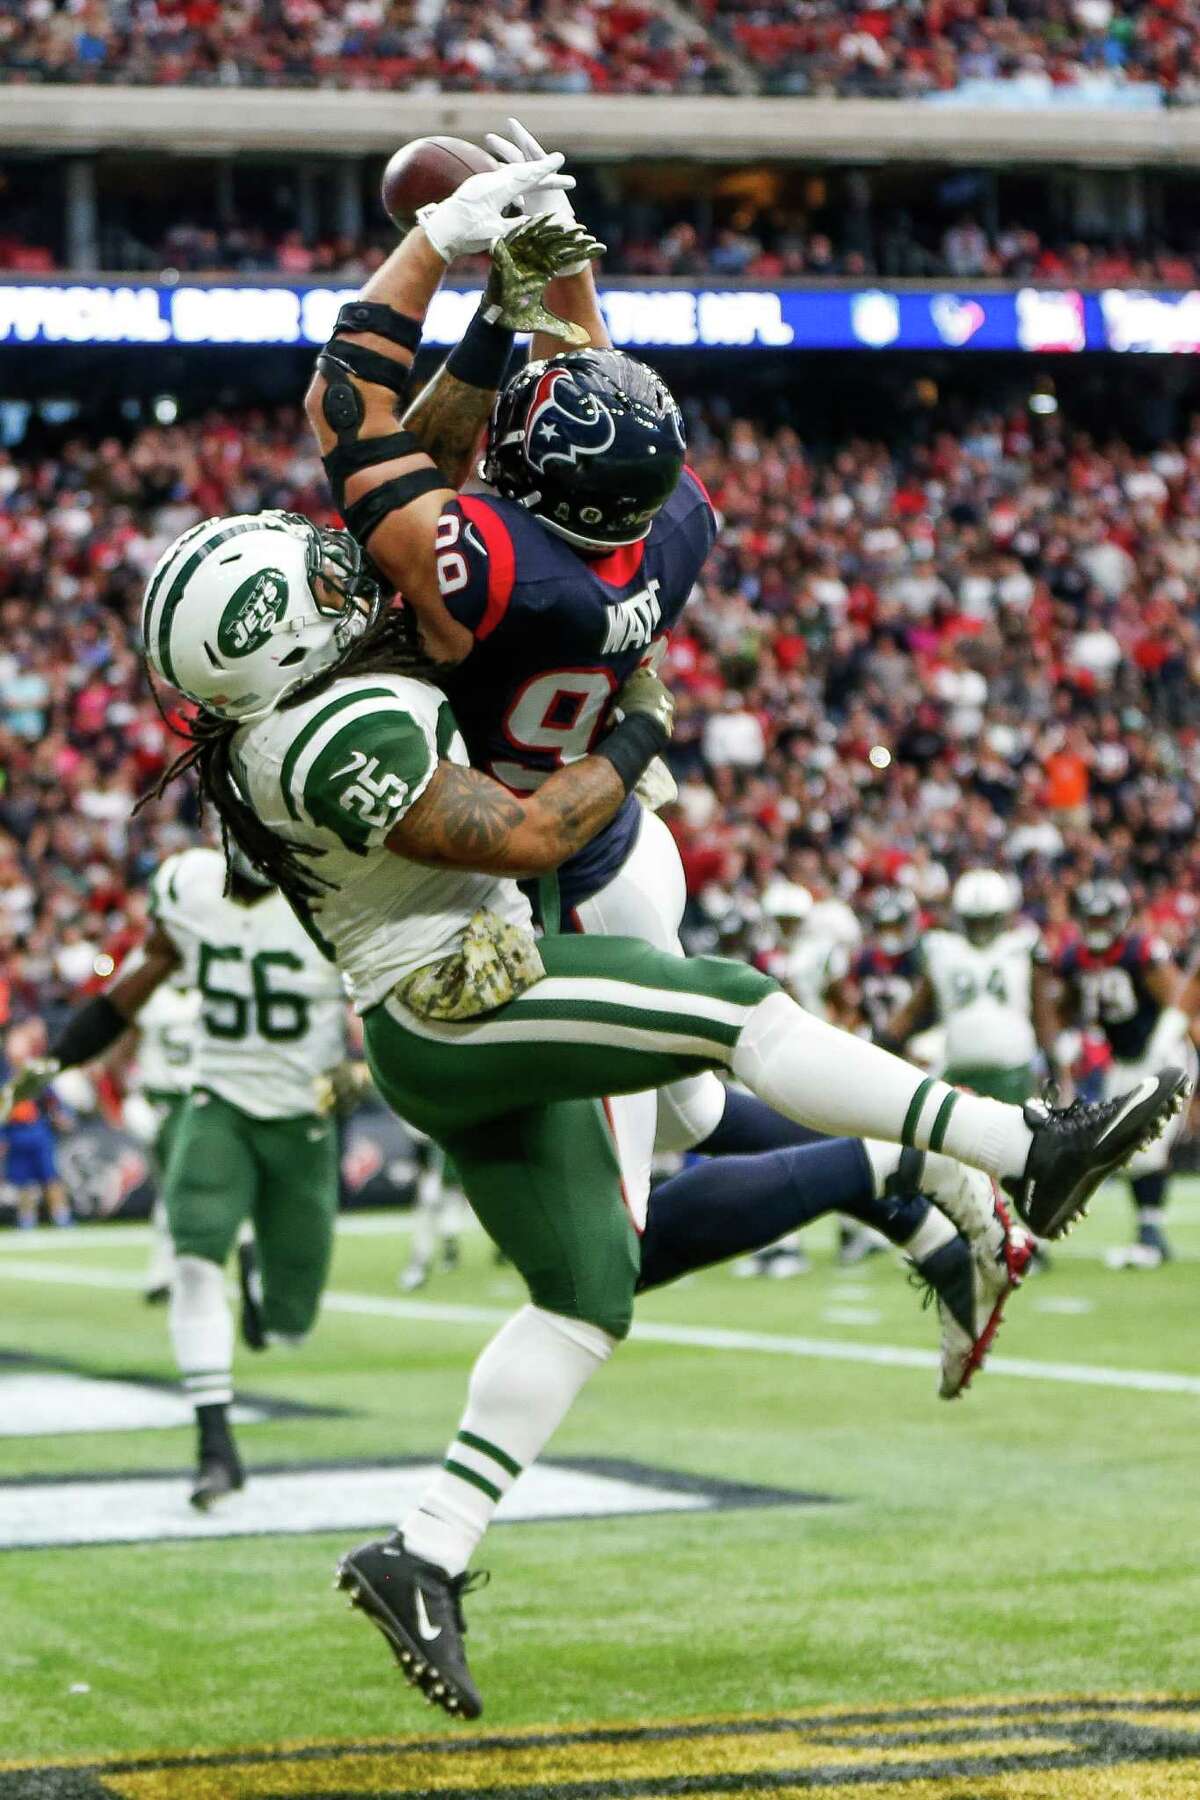 J.J. Watt fails to come up with a first-quarter pass while covered by Jets safety Calvin Pryor.